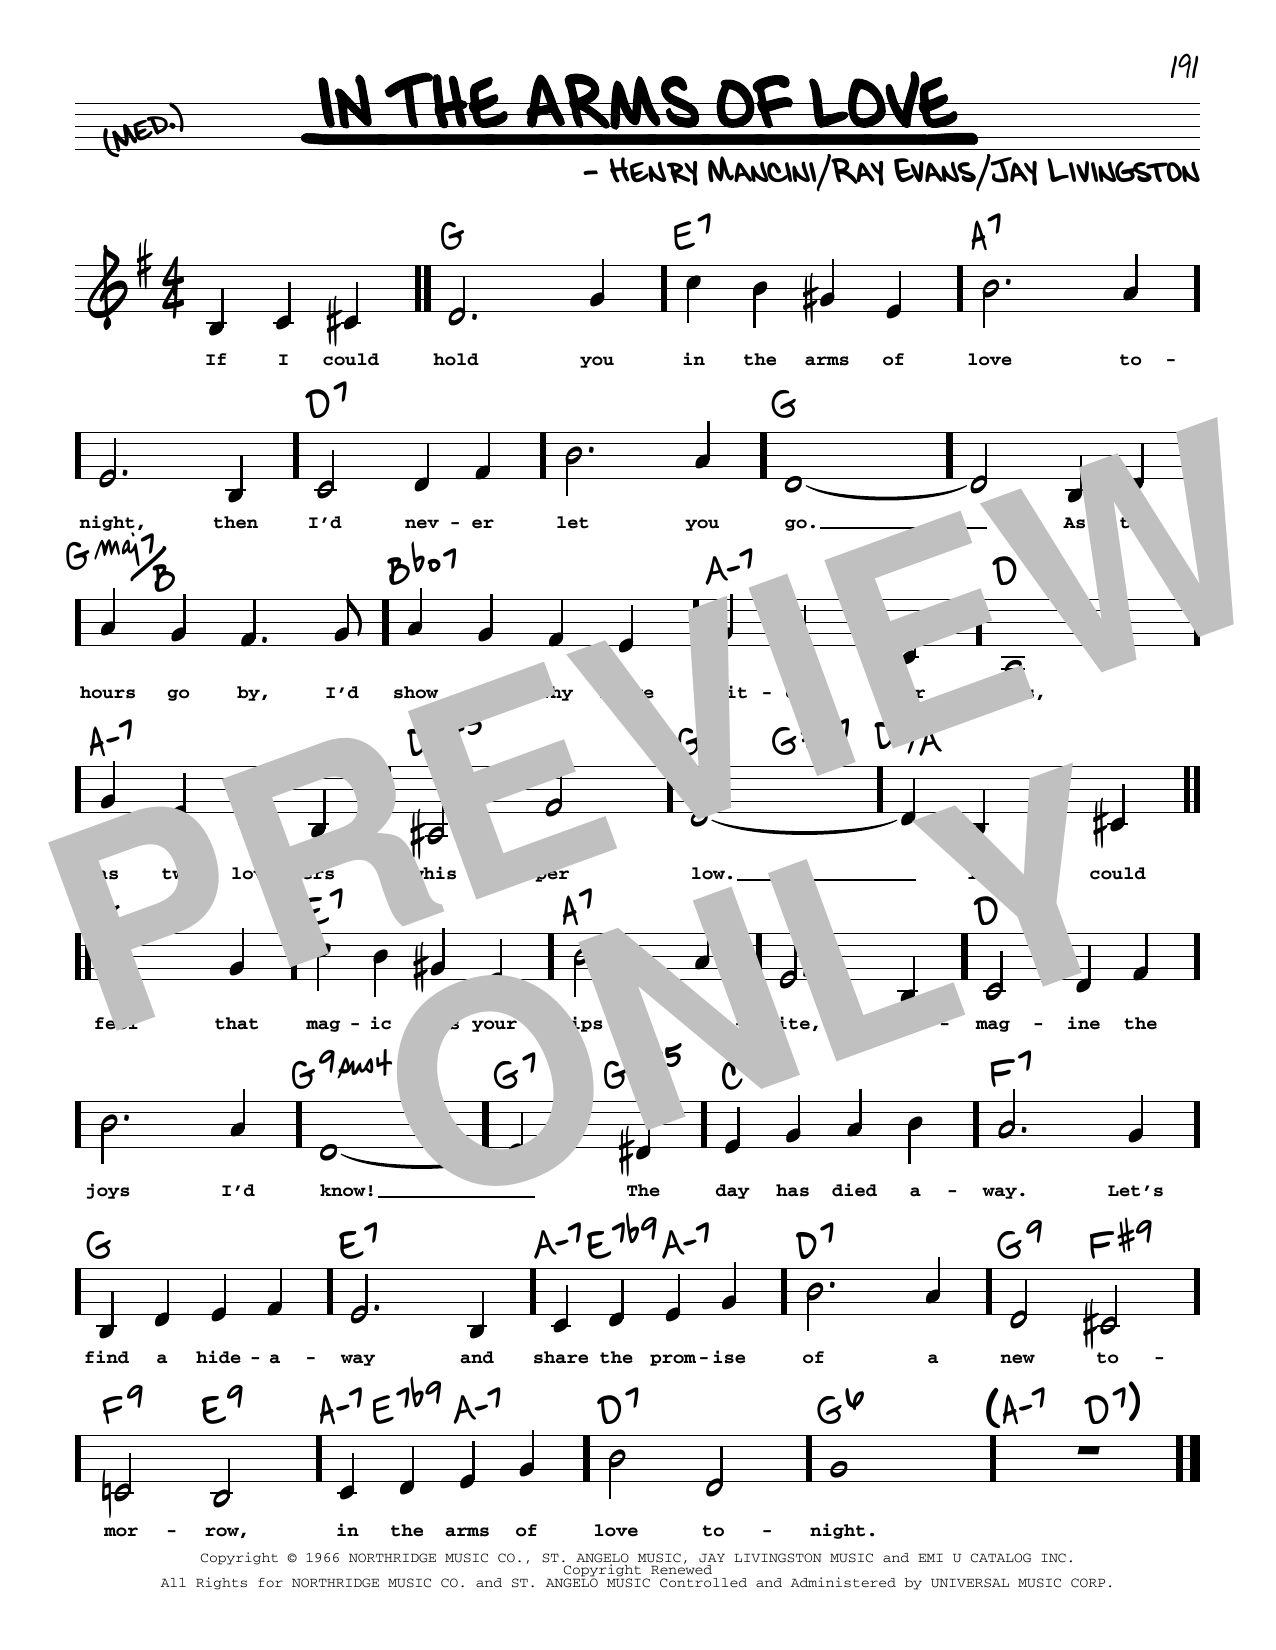 Henry Mancini In The Arms Of Love (Low Voice) sheet music notes printable PDF score